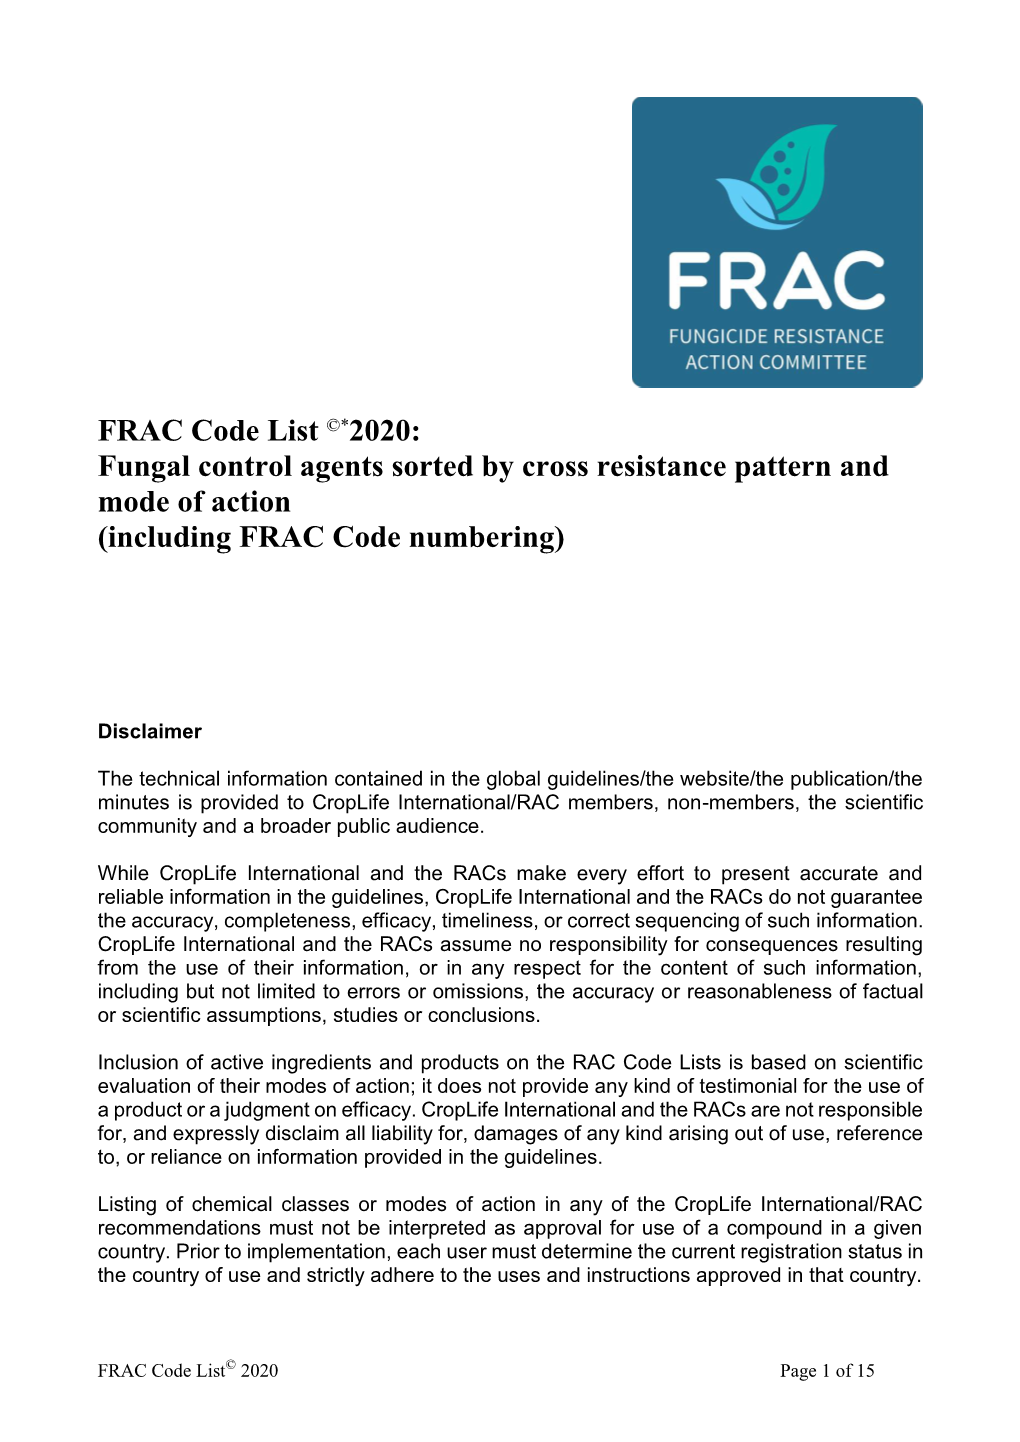 FRAC Code List ©*2020: Fungal Control Agents Sorted by Cross Resistance Pattern and Mode of Action (Including FRAC Code Numbering)